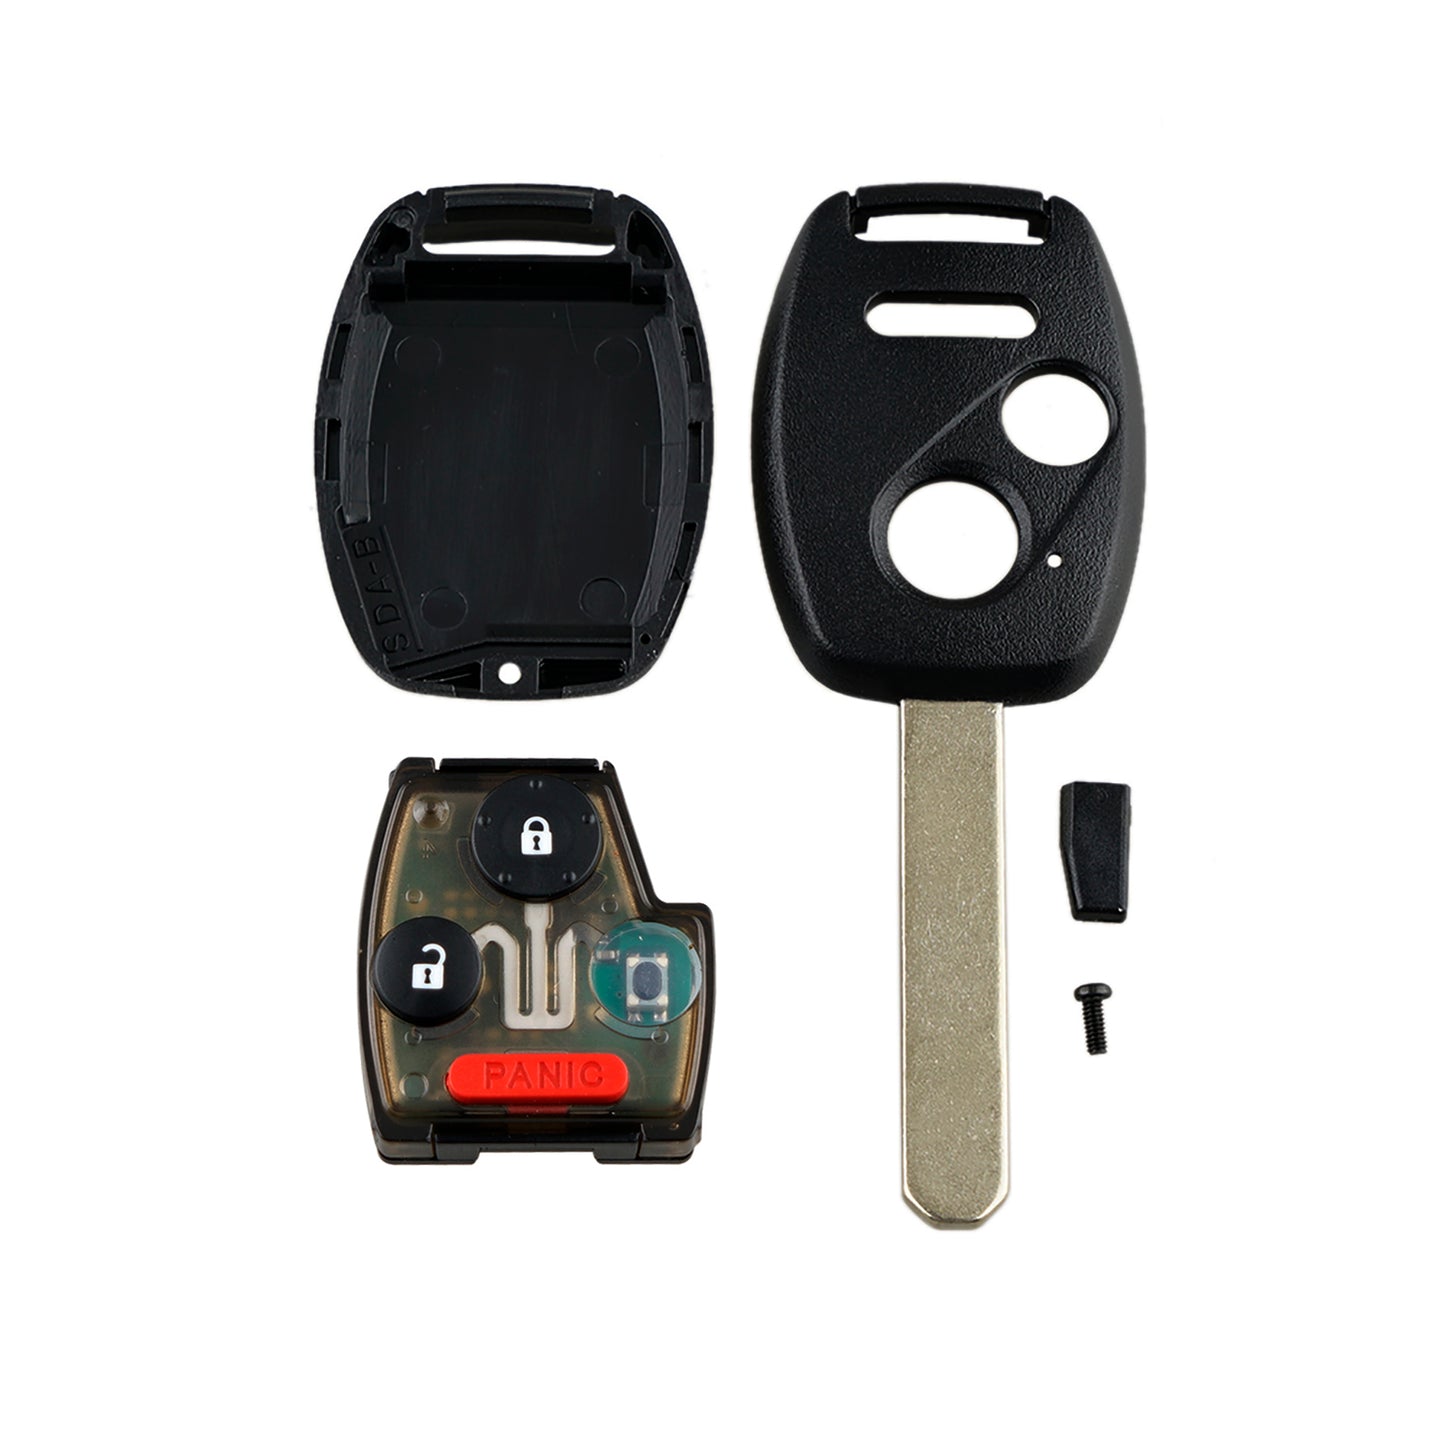 3 Buttons 313.8MHz Keyless Entry Fob Remote Car Key For 2005-2014 Honda Odyssey (LX models Only) Ridgeline FitFCC ID:OUCG8D-380H-A SKU : J055